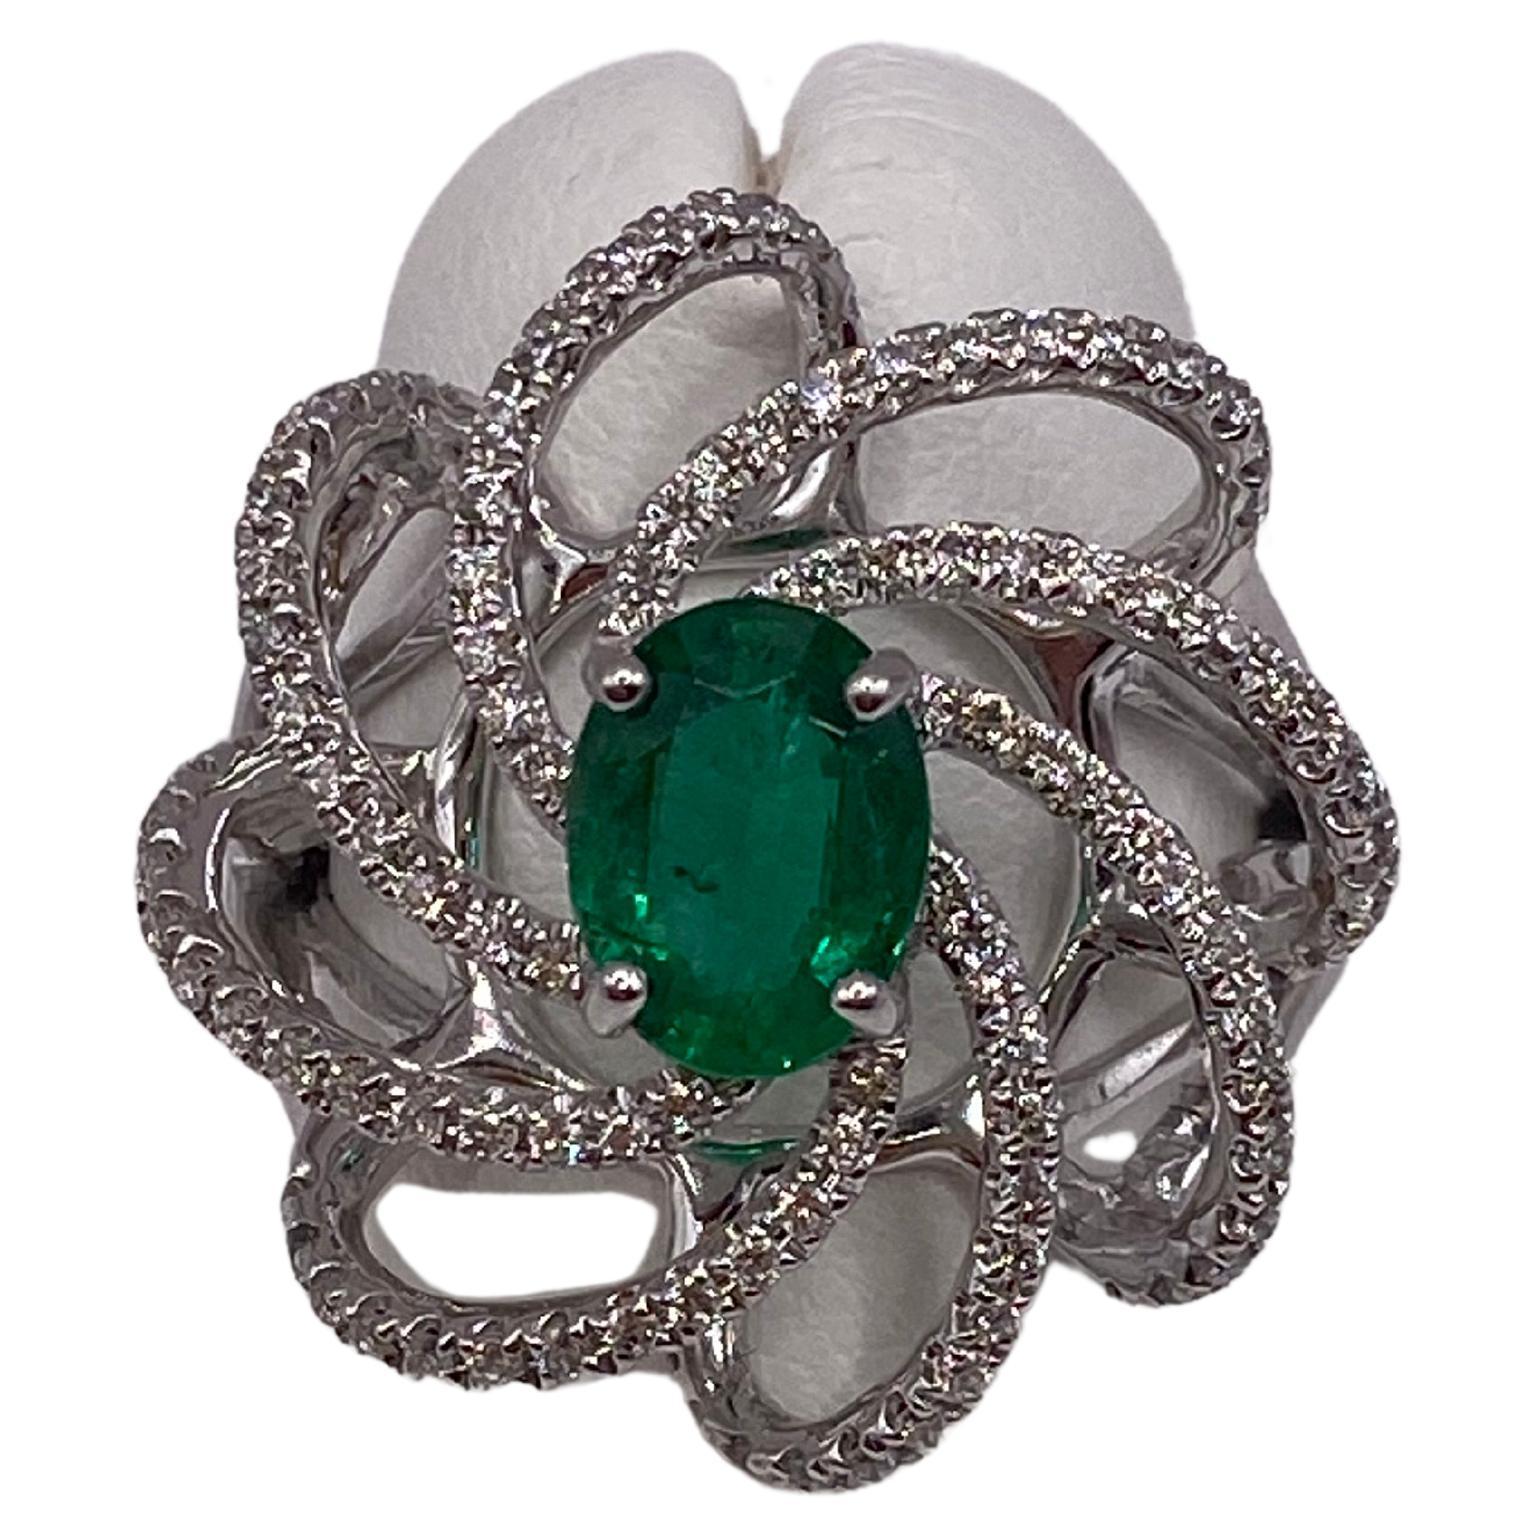 1.42ctw Oval Emerald & Round Diamond Ring in 18KT White Gold